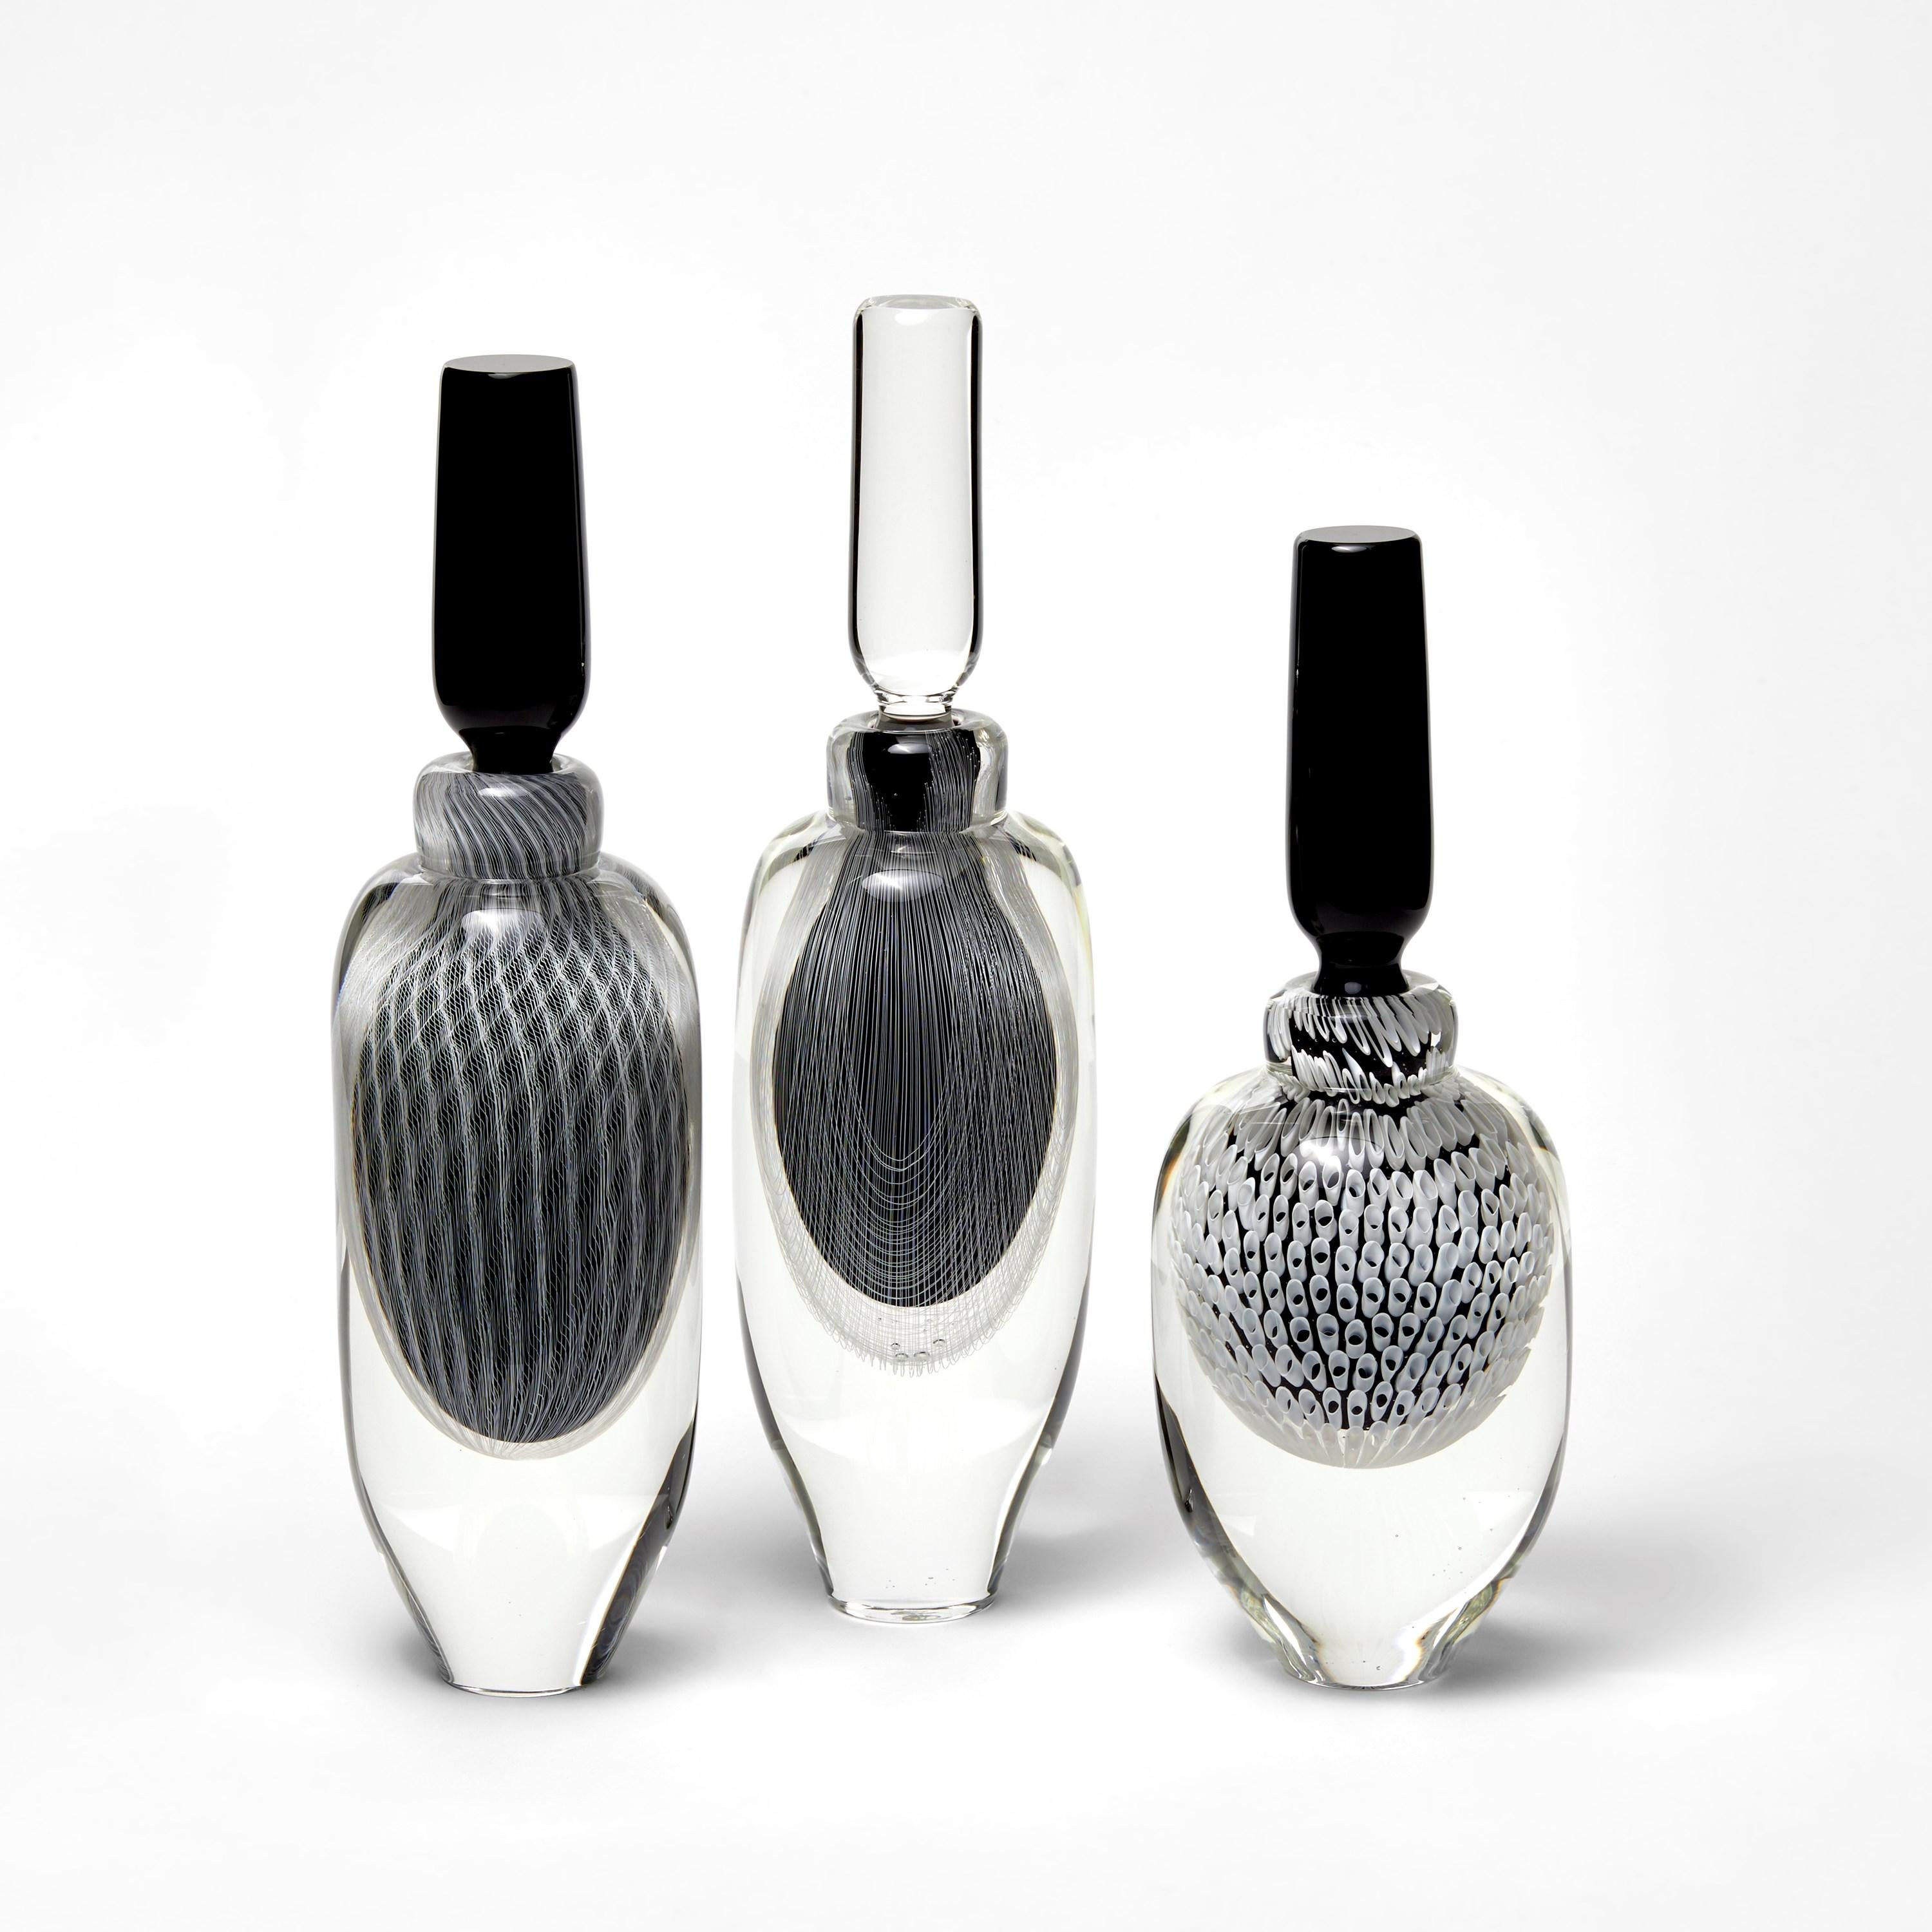 Moire, a Black, White & Clear Large Sculptural Glass Bottle by Peter Bowles In New Condition For Sale In London, GB